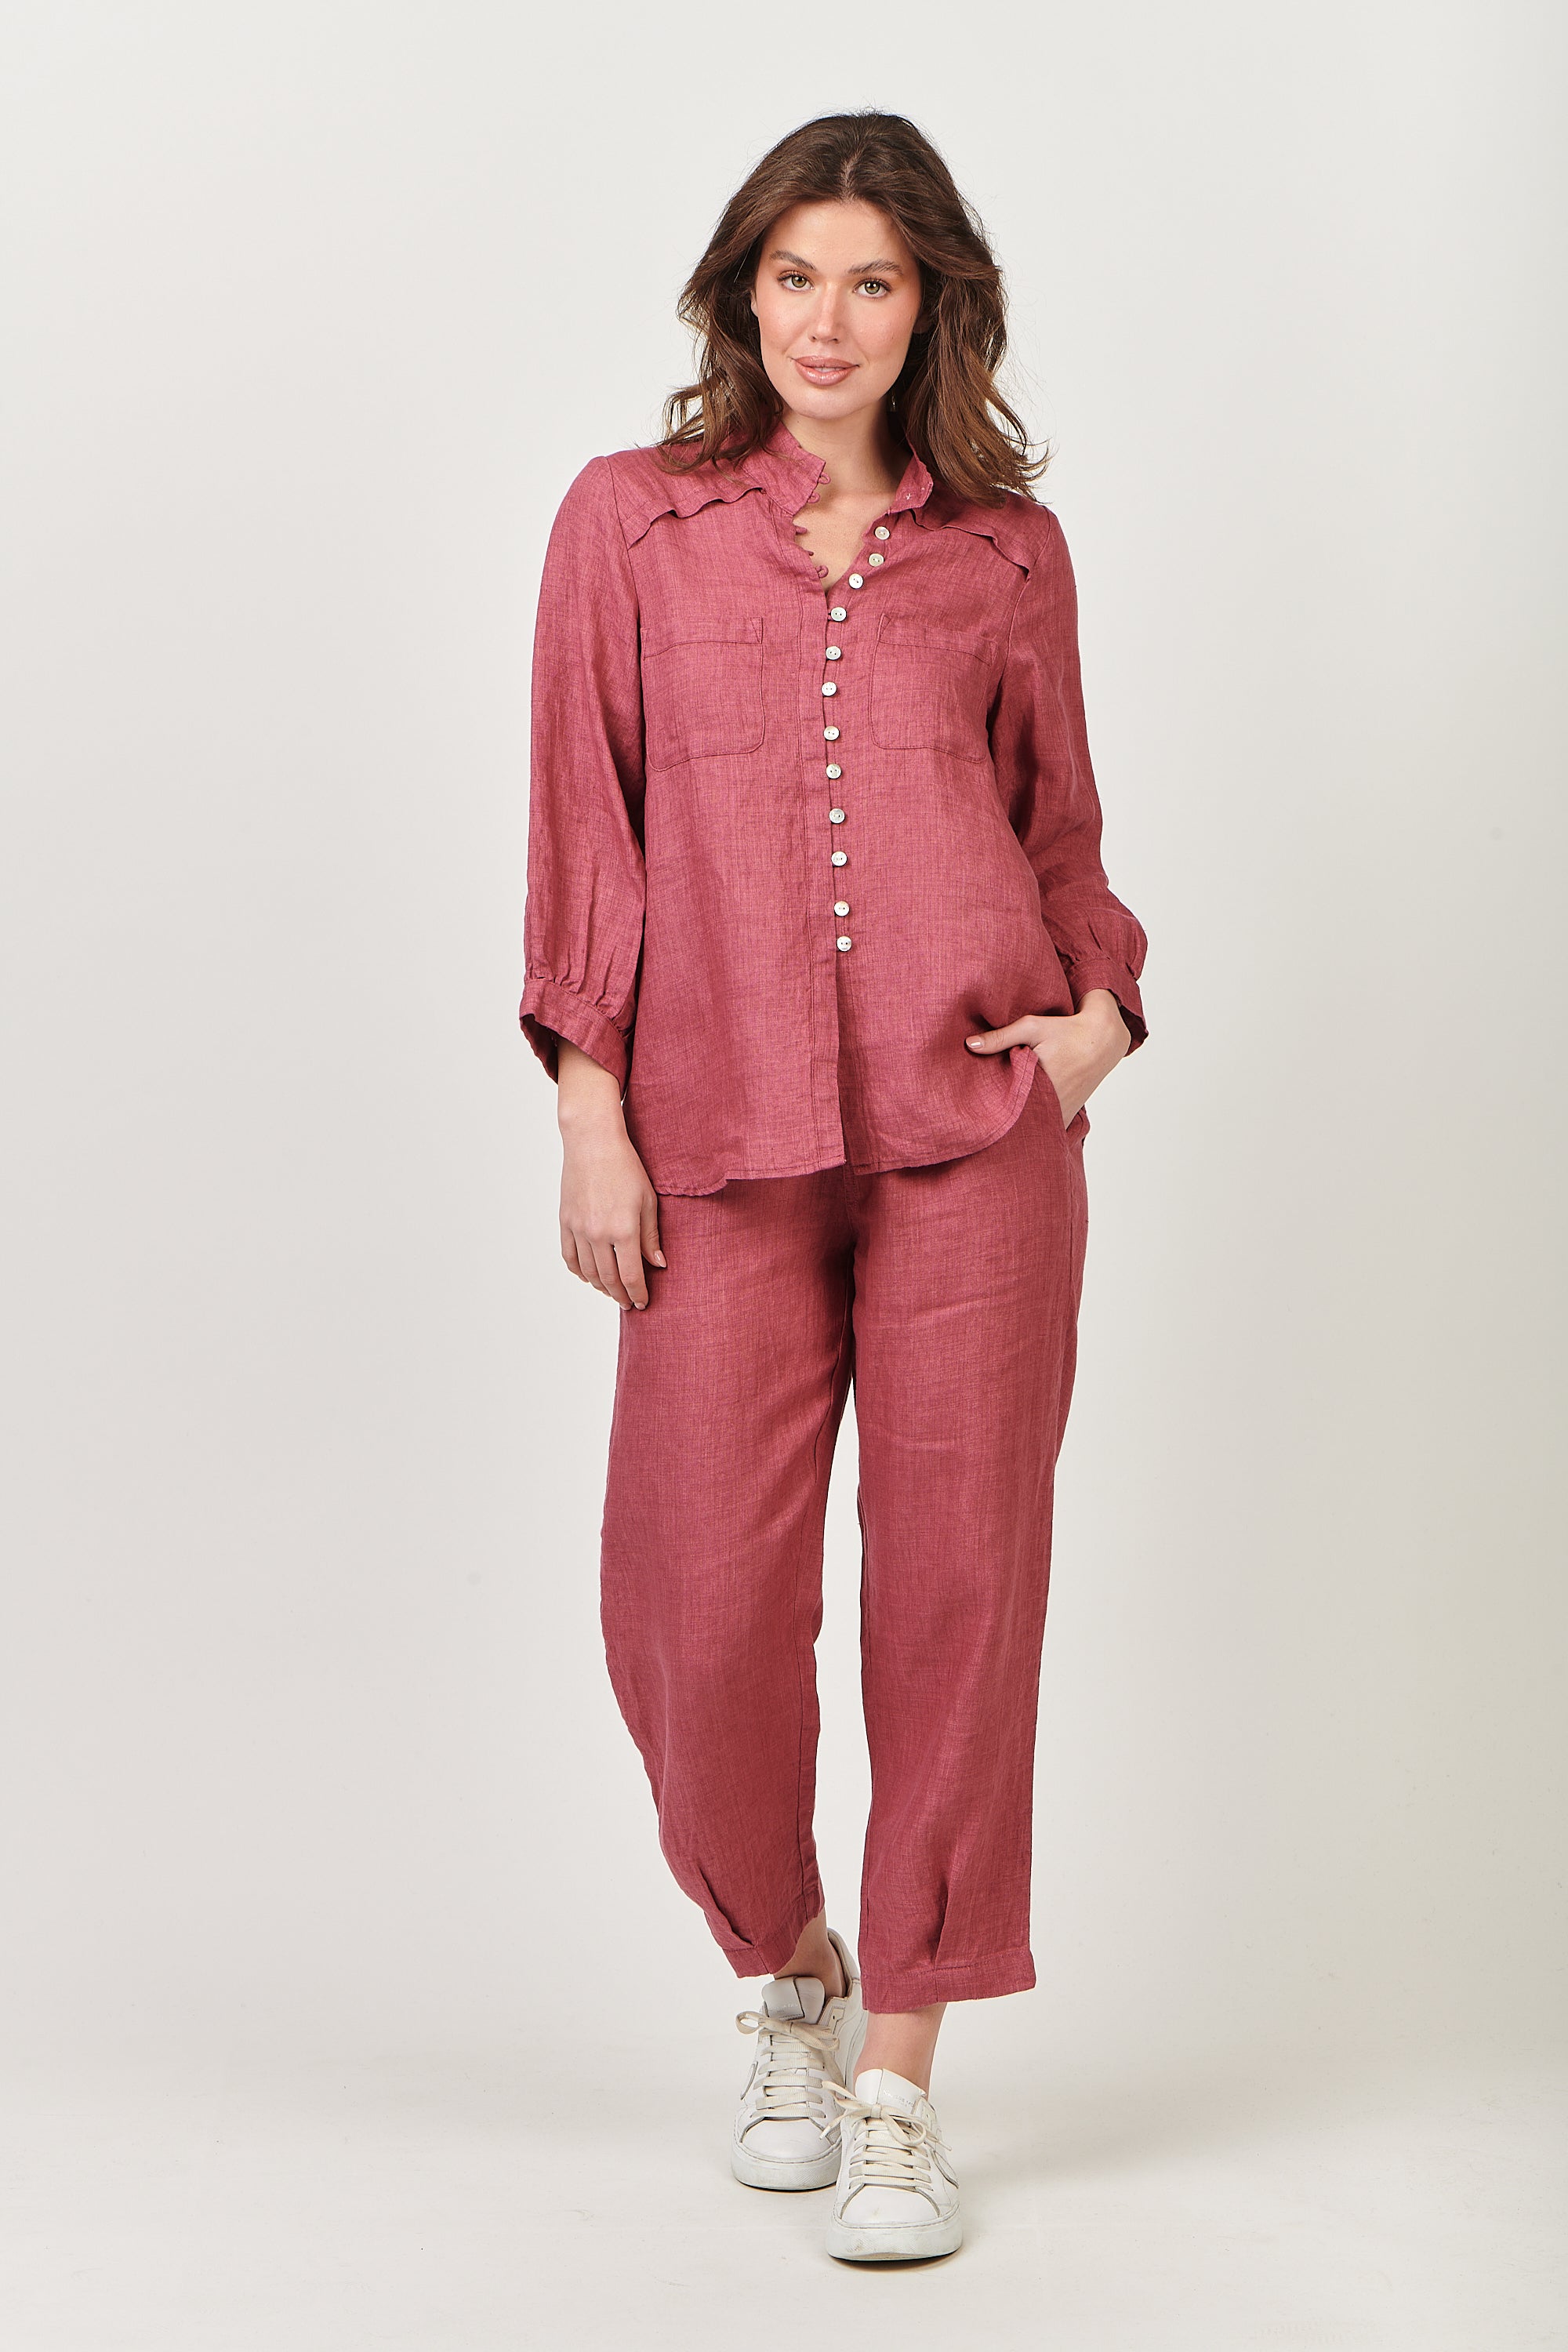 Linen High Neck Top - Rhubarb-Tops-Naturals by O&J-The Bay Room